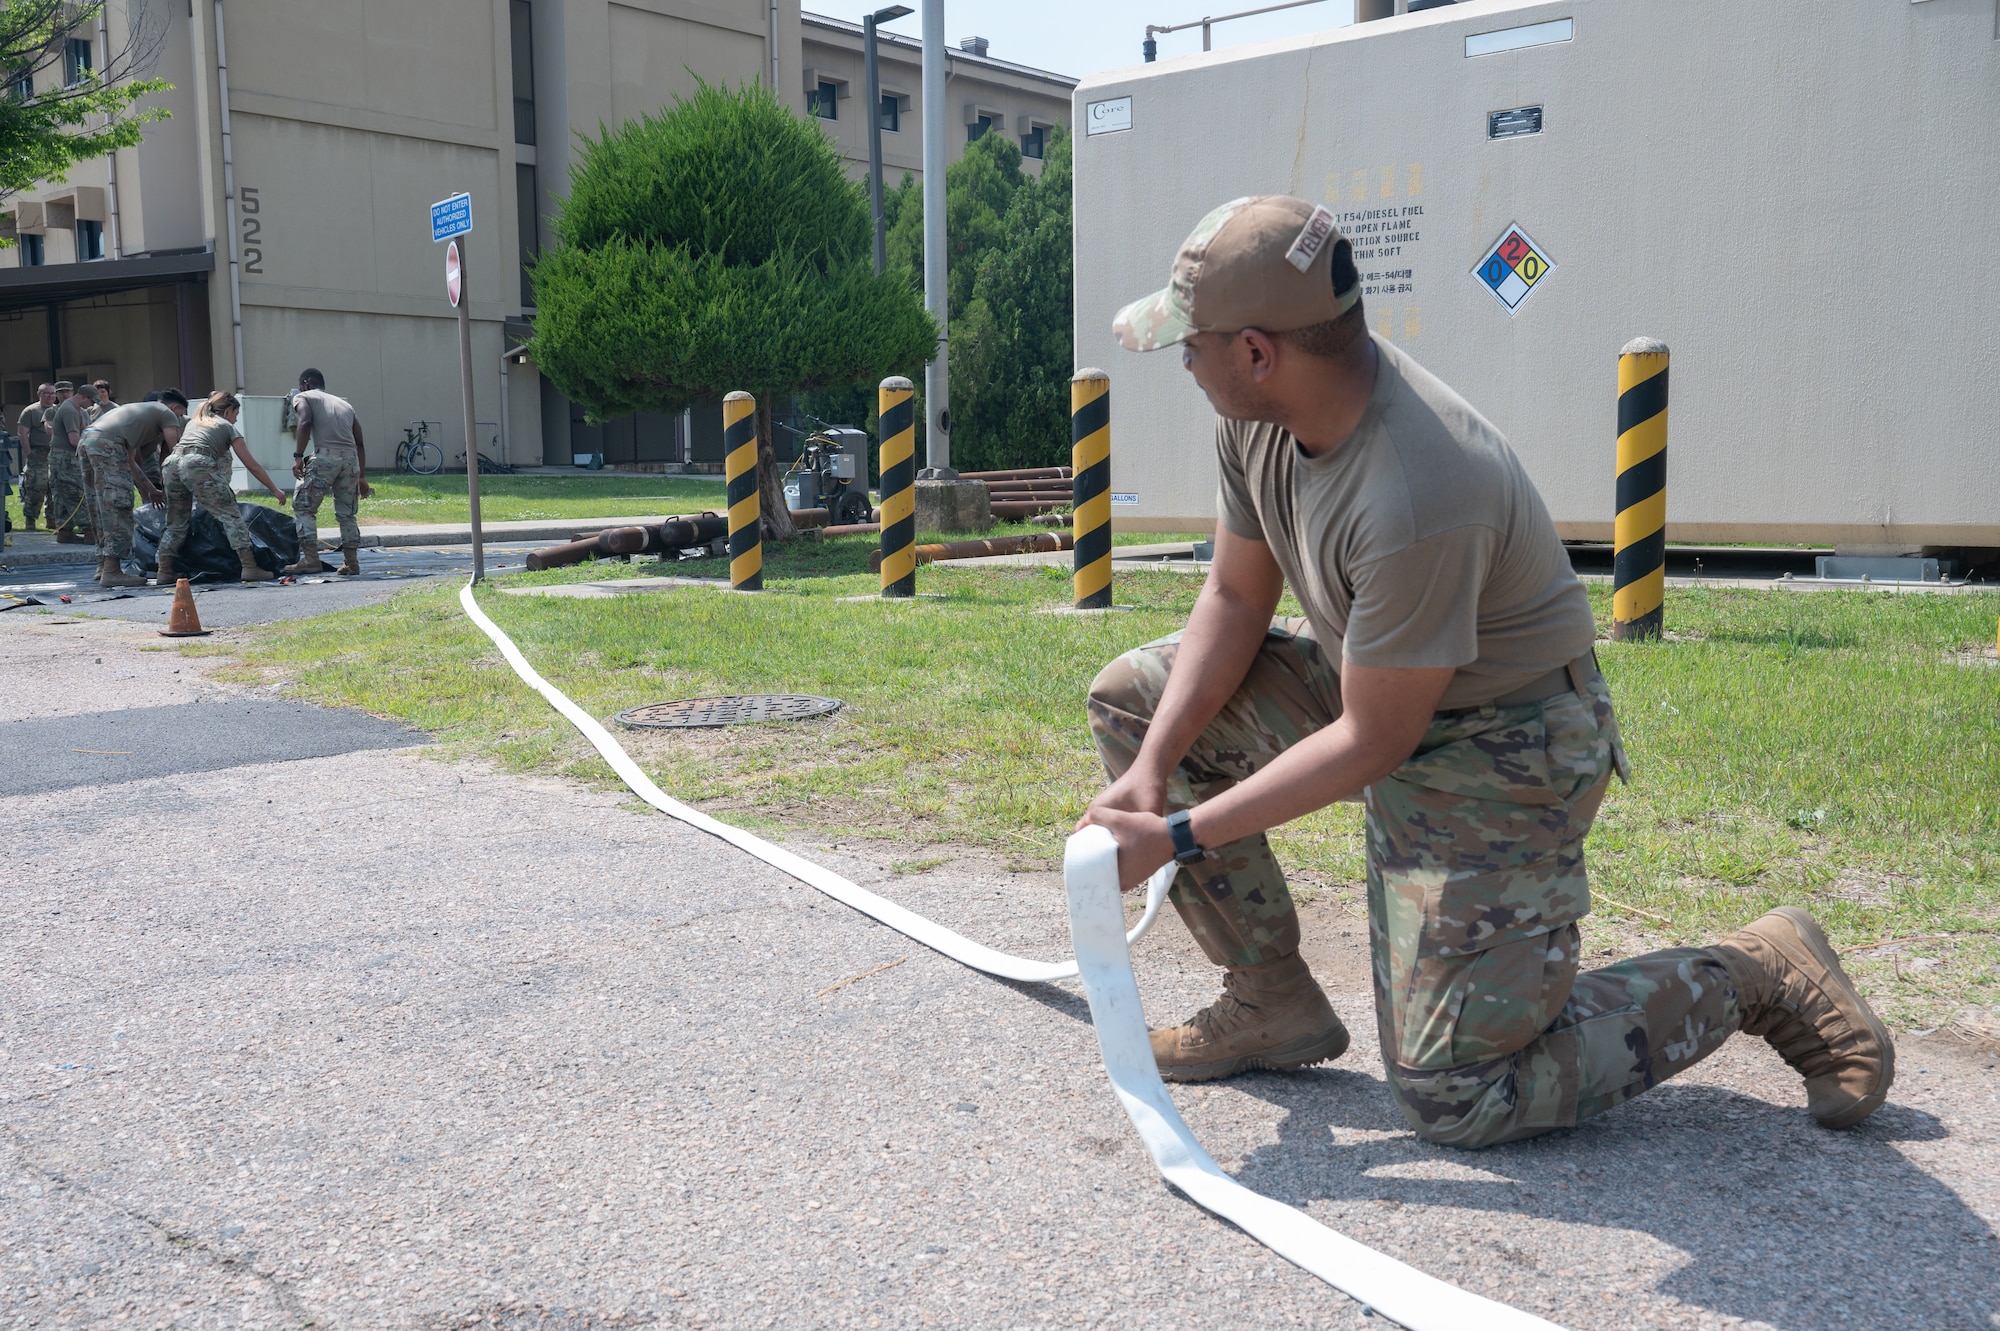 Airman secures water hose